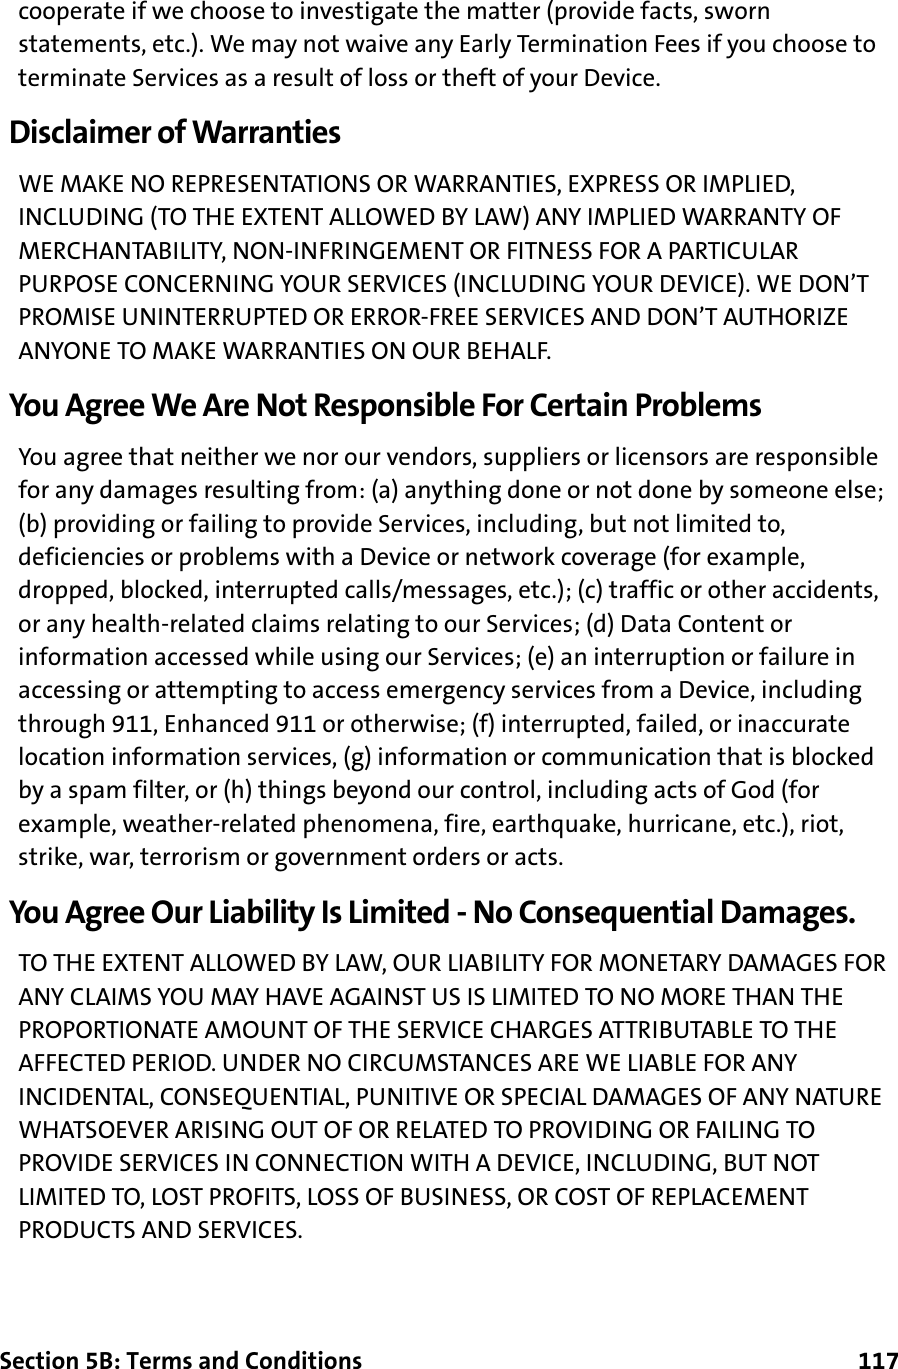 Section 5B: Terms and Conditions      117cooperate if we choose to investigate the matter (provide facts, sworn statements, etc.). We may not waive any Early Termination Fees if you choose to terminate Services as a result of loss or theft of your Device.Disclaimer of WarrantiesWE MAKE NO REPRESENTATIONS OR WARRANTIES, EXPRESS OR IMPLIED, INCLUDING (TO THE EXTENT ALLOWED BY LAW) ANY IMPLIED WARRANTY OF MERCHANTABILITY, NON-INFRINGEMENT OR FITNESS FOR A PARTICULAR PURPOSE CONCERNING YOUR SERVICES (INCLUDING YOUR DEVICE). WE DON’T PROMISE UNINTERRUPTED OR ERROR-FREE SERVICES AND DON’T AUTHORIZE ANYONE TO MAKE WARRANTIES ON OUR BEHALF.You Agree We Are Not Responsible For Certain ProblemsYou agree that neither we nor our vendors, suppliers or licensors are responsible for any damages resulting from: (a) anything done or not done by someone else; (b) providing or failing to provide Services, including, but not limited to, deficiencies or problems with a Device or network coverage (for example, dropped, blocked, interrupted calls/messages, etc.); (c) traffic or other accidents, or any health-related claims relating to our Services; (d) Data Content or information accessed while using our Services; (e) an interruption or failure in accessing or attempting to access emergency services from a Device, including through 911, Enhanced 911 or otherwise; (f) interrupted, failed, or inaccurate location information services, (g) information or communication that is blocked by a spam filter, or (h) things beyond our control, including acts of God (for example, weather-related phenomena, fire, earthquake, hurricane, etc.), riot, strike, war, terrorism or government orders or acts.You Agree Our Liability Is Limited - No Consequential Damages.TO THE EXTENT ALLOWED BY LAW, OUR LIABILITY FOR MONETARY DAMAGES FOR ANY CLAIMS YOU MAY HAVE AGAINST US IS LIMITED TO NO MORE THAN THE PROPORTIONATE AMOUNT OF THE SERVICE CHARGES ATTRIBUTABLE TO THE AFFECTED PERIOD. UNDER NO CIRCUMSTANCES ARE WE LIABLE FOR ANY INCIDENTAL, CONSEQUENTIAL, PUNITIVE OR SPECIAL DAMAGES OF ANY NATURE WHATSOEVER ARISING OUT OF OR RELATED TO PROVIDING OR FAILING TO PROVIDE SERVICES IN CONNECTION WITH A DEVICE, INCLUDING, BUT NOT LIMITED TO, LOST PROFITS, LOSS OF BUSINESS, OR COST OF REPLACEMENT PRODUCTS AND SERVICES.